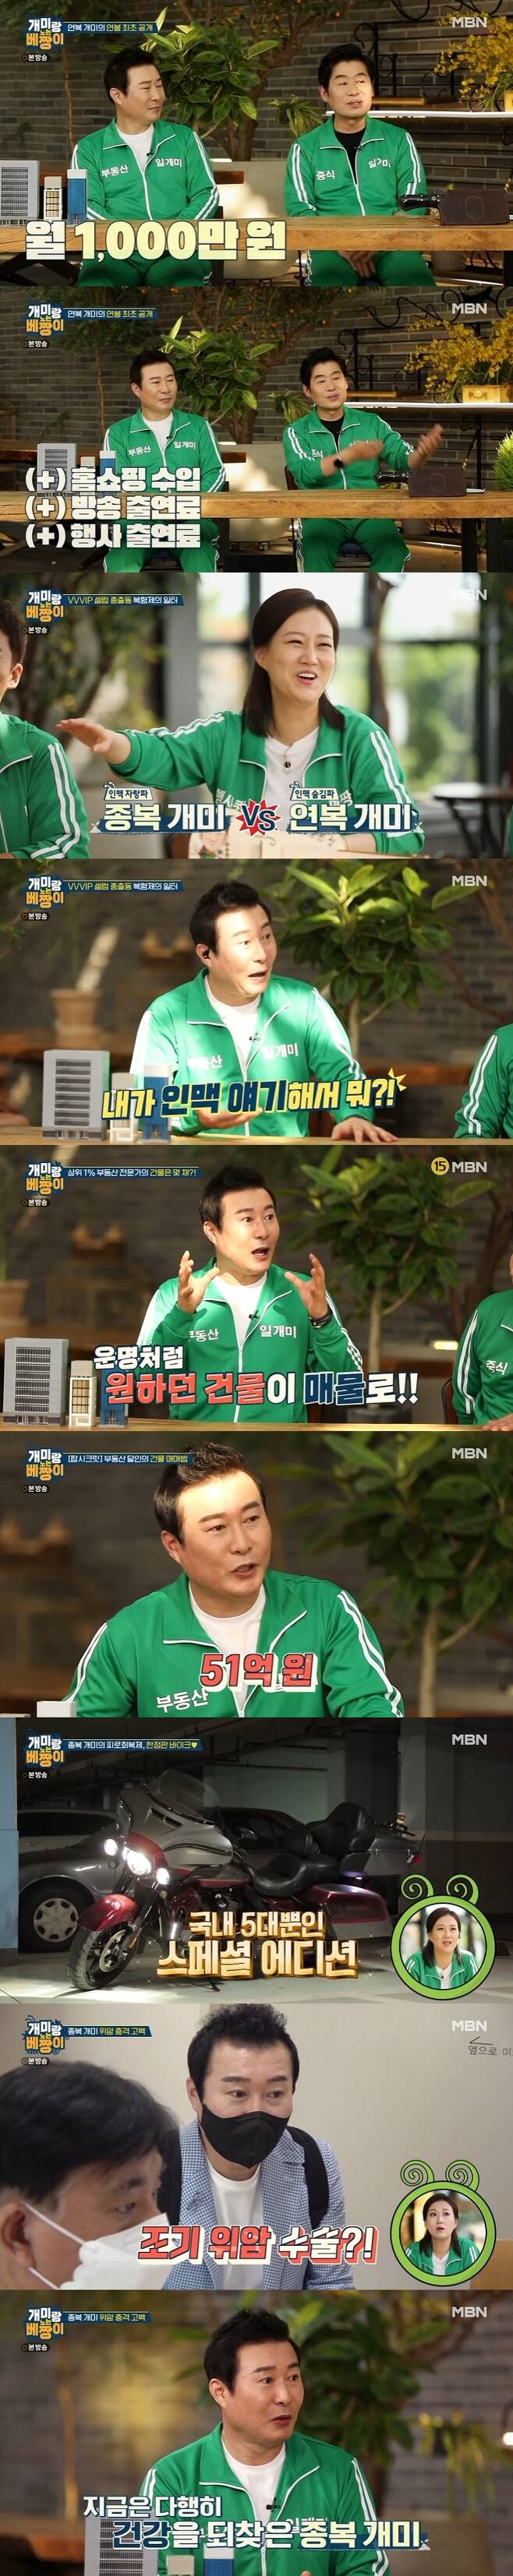 Cooking researcher Lee Yeon-bok and Real Estate consultant park jong-bok were laughing in a different way.MBN Ants and Playing Grasshop broadcast on June 21 revealed Lee Yeon-bok, park jong-bok daily life.Park jong-bok said, Customers come over on weekends and work for about 360 days, and I have a lot of rest for five days.Since then, Park jong-bok has shown a model of his consulting building.This is a So Ji-sub building, this is a Seo Jang-hoon building, Park jong-bok explained.Park jong-bok went to work at 5 a.m. Park jong-bok went to work and showed his pride when he heard that his recommended sale had risen in price.The company operated by park jong-bok was a large company with 150 employees; Jang Yun-jeong was surprised that it was not a Bokdeokbang feeling; its a company.Park jong-bok used his meal time to meet with an acquaintance; park jong-bok predicted an area where the sale would rise as a Real Estate consultant in 28 years.After the breakfast meeting, Park jong-bok conducted a real estate field survey with a new employee.Park jong-bok handed down the real estate investment honey tips by looking at Lee Mun-se and Oh Yeon-su Son Ji-chang.Lee Yeon-bok Chef routine was then drawn; Lee Yeon-bok also worked as busy as the famous Chinese Chef.However, he showed his warmth by eating sweet and sour pork, rice, and kimchi stew.When asked by Jun Hyun-moo, When did you start working on a Real Estate?, Park jong-bok said: I married in 1997; my honeymoon home was a branch office.It was 1.5 stories underground, and it was raining back. It was so sad because the children were bitten by ants. I worked really hard to escape from the underground. I moved 26 times. I was a lawyer secretary, but I did not have much income.I was in charge of a lot of real estate lawsuits, but those who did not have expertise did real estate and lightly believed in real estate agents.It was just my style, he said.Lee Yeon-bok said of his salary, Paycheck is frankly 10 million won per month. Home shopping income, broadcast performance fee, event performance fee This is not a certain income.Its a corporate operator, replied Jun Hyun-moo, youre looking for a lot of entertainer customers Lee Yeon-bok Restorant.Is there a celebrity who comes often? Lee Yeon-bok said, Its not a name to mention.Celebrities provide a place for secret dates. I give a room when I go out because I do not know whether to marry or not. Jang Yun-jeong said: I can feel the two peoples textures are different here: Lee Yeon-bok Chef doesnt mention the real name.Park jong-bok said, So Ji-sub, Seo Jang-hoon talked about earlier. Park jong-bok laughed, saying, So I am light.Jun Hyun-moo asked Park jong-bok, who runs six corporate companies, How many buildings do you have? And Park jong-bok said, Apartment, six buildings except for houses.I do not think taxes are scary, but I hope you will invest boldly in what is worth rising. Park jong-bok also unveiled his favorite building. Park jong-bok said, I recently bought one. Hannam-dong. Its a place Ive been watching for five to six years.I just got paid for it because I had to buy it for 5.1 billion won. I wanted to pay the office.I dont do it in my name when Im signing a Real Estate contract. Send an agent. You can change your name until the date of designation.If you know that the contractor is me, you may ask for more prices, or you may think, What is your plan? The remittance is also in the name of another person. Lee Yeon-bok then gained YouTube advice from his acquaintances, took a picture of a novice YouTuber, and Park jong-bok showed off his affection for a limited edition bike and emanated a charm of reversal.In particular, park jong-bok confessed to having a stomach cancer surgery; park jong-bok said, I did a health checkup and was diagnosed with early gastric cancer.The doctor said he had surgery and had not metastasized. He asked me to check again after six months.